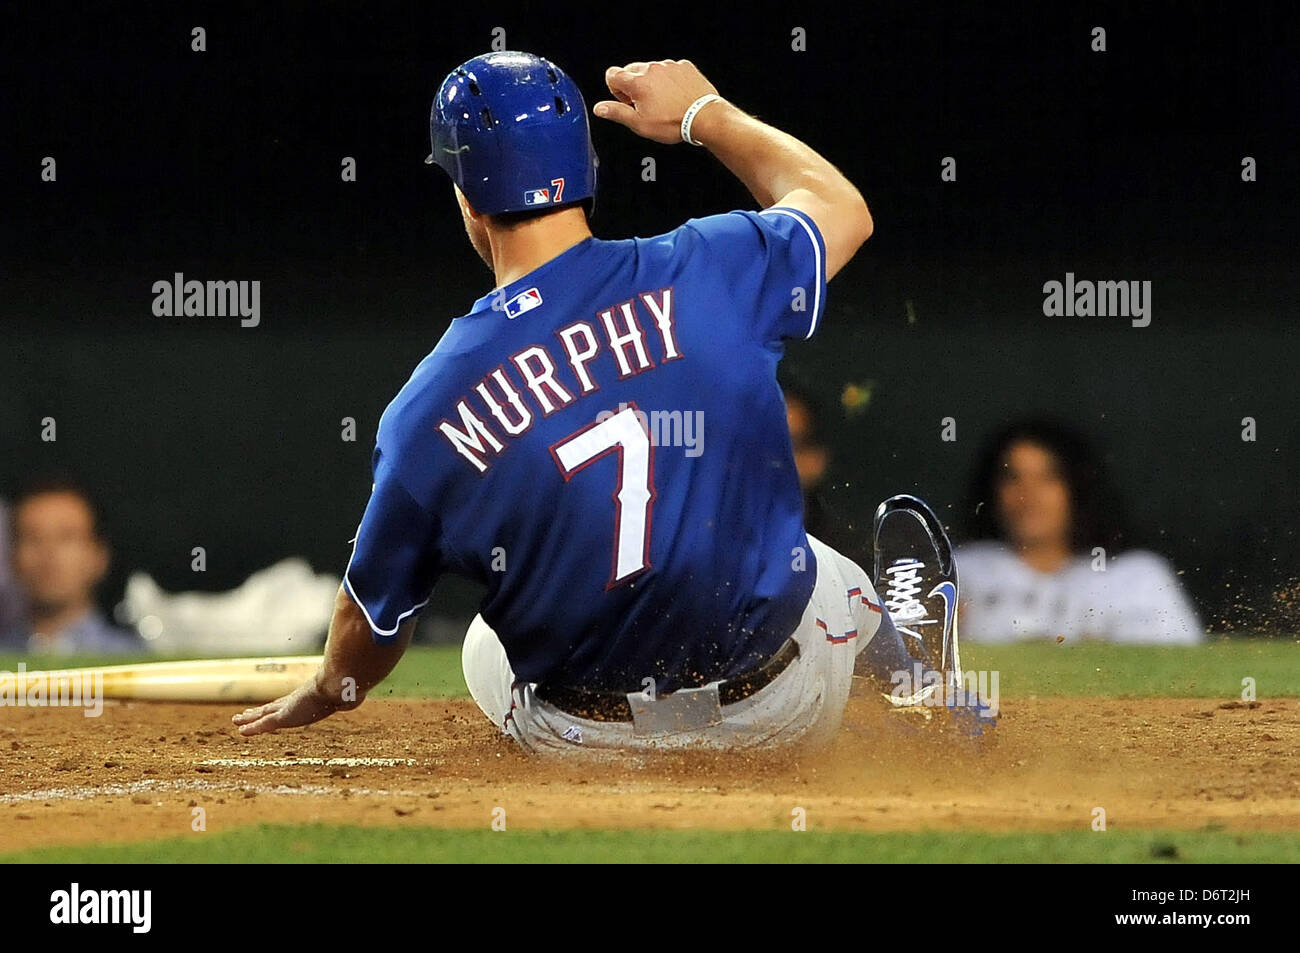 Anaheim, California, USA. 22nd April, 2013. Texas' David Murphy #7 slides safely at home plate to score a run during the Major League Baseball game between the Texas Rangers and the Los Angeles Angels of Anaheim at Angel Stadium in Anaheim, California. Josh Thompson/Cal Sport Media/Alamy Live News Stock Photo